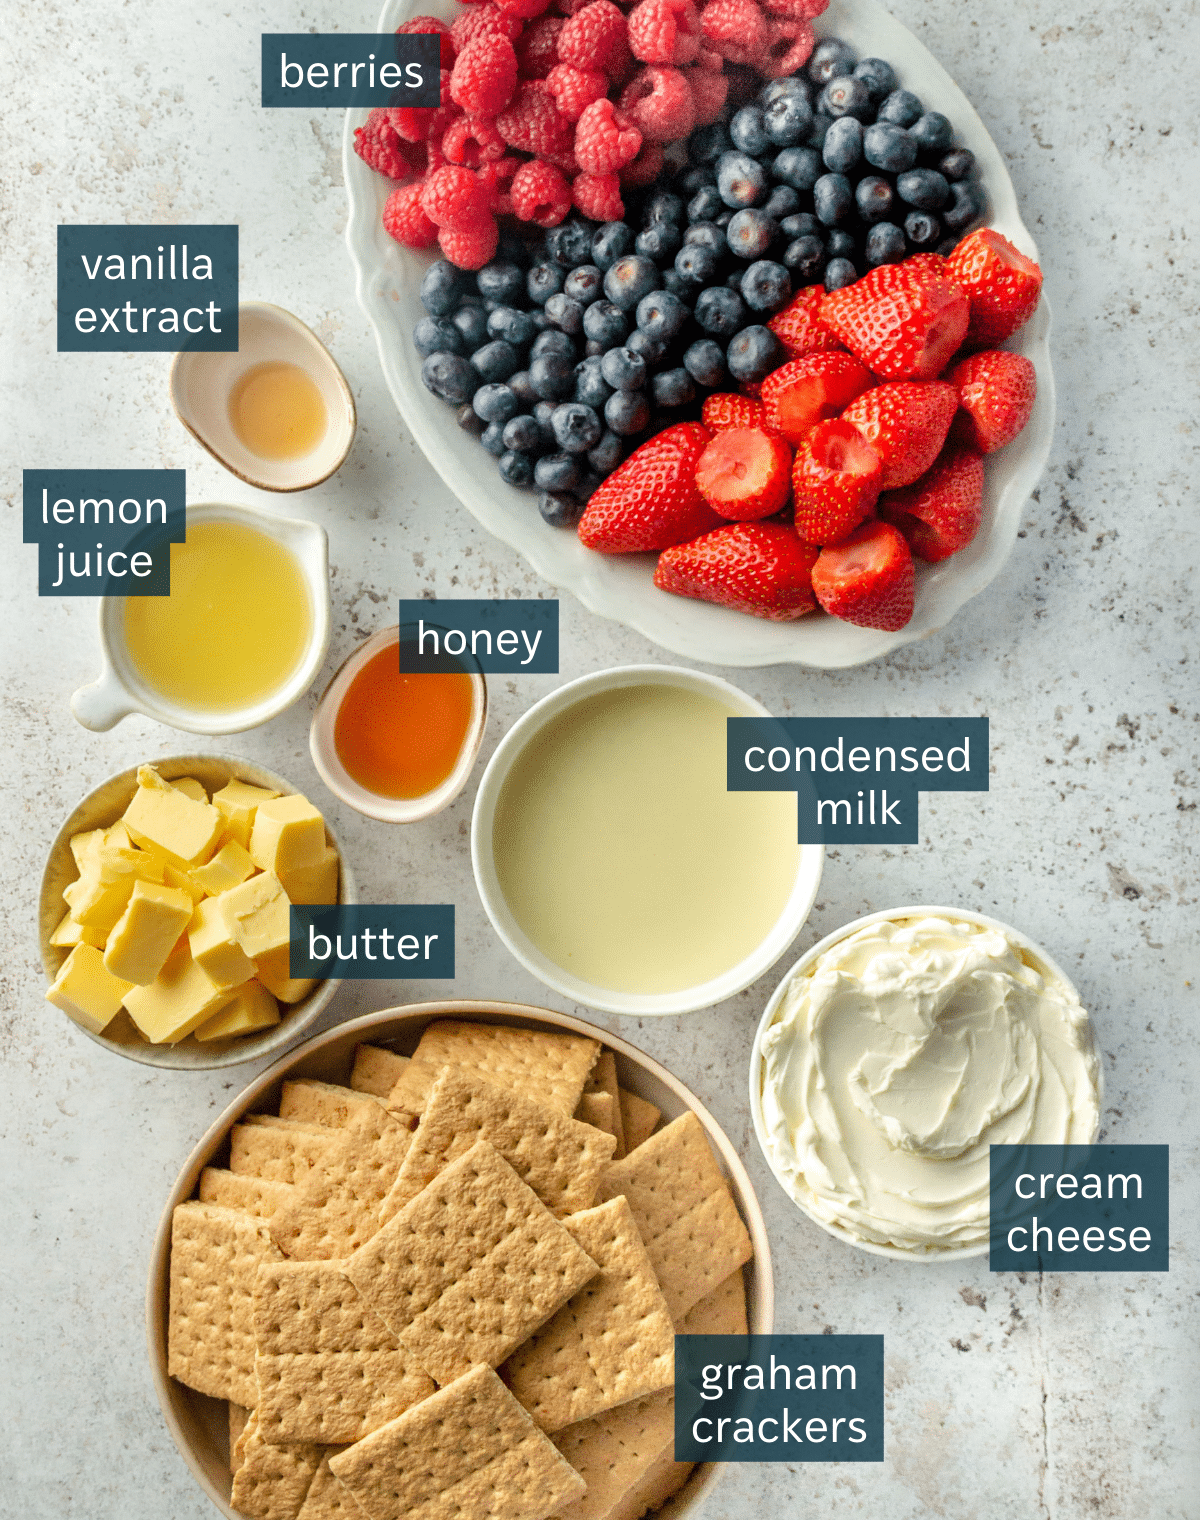 All of the ingredients needed for no-bake mason jar cheesecakes in different sized bowls and plates on a light gray surface.